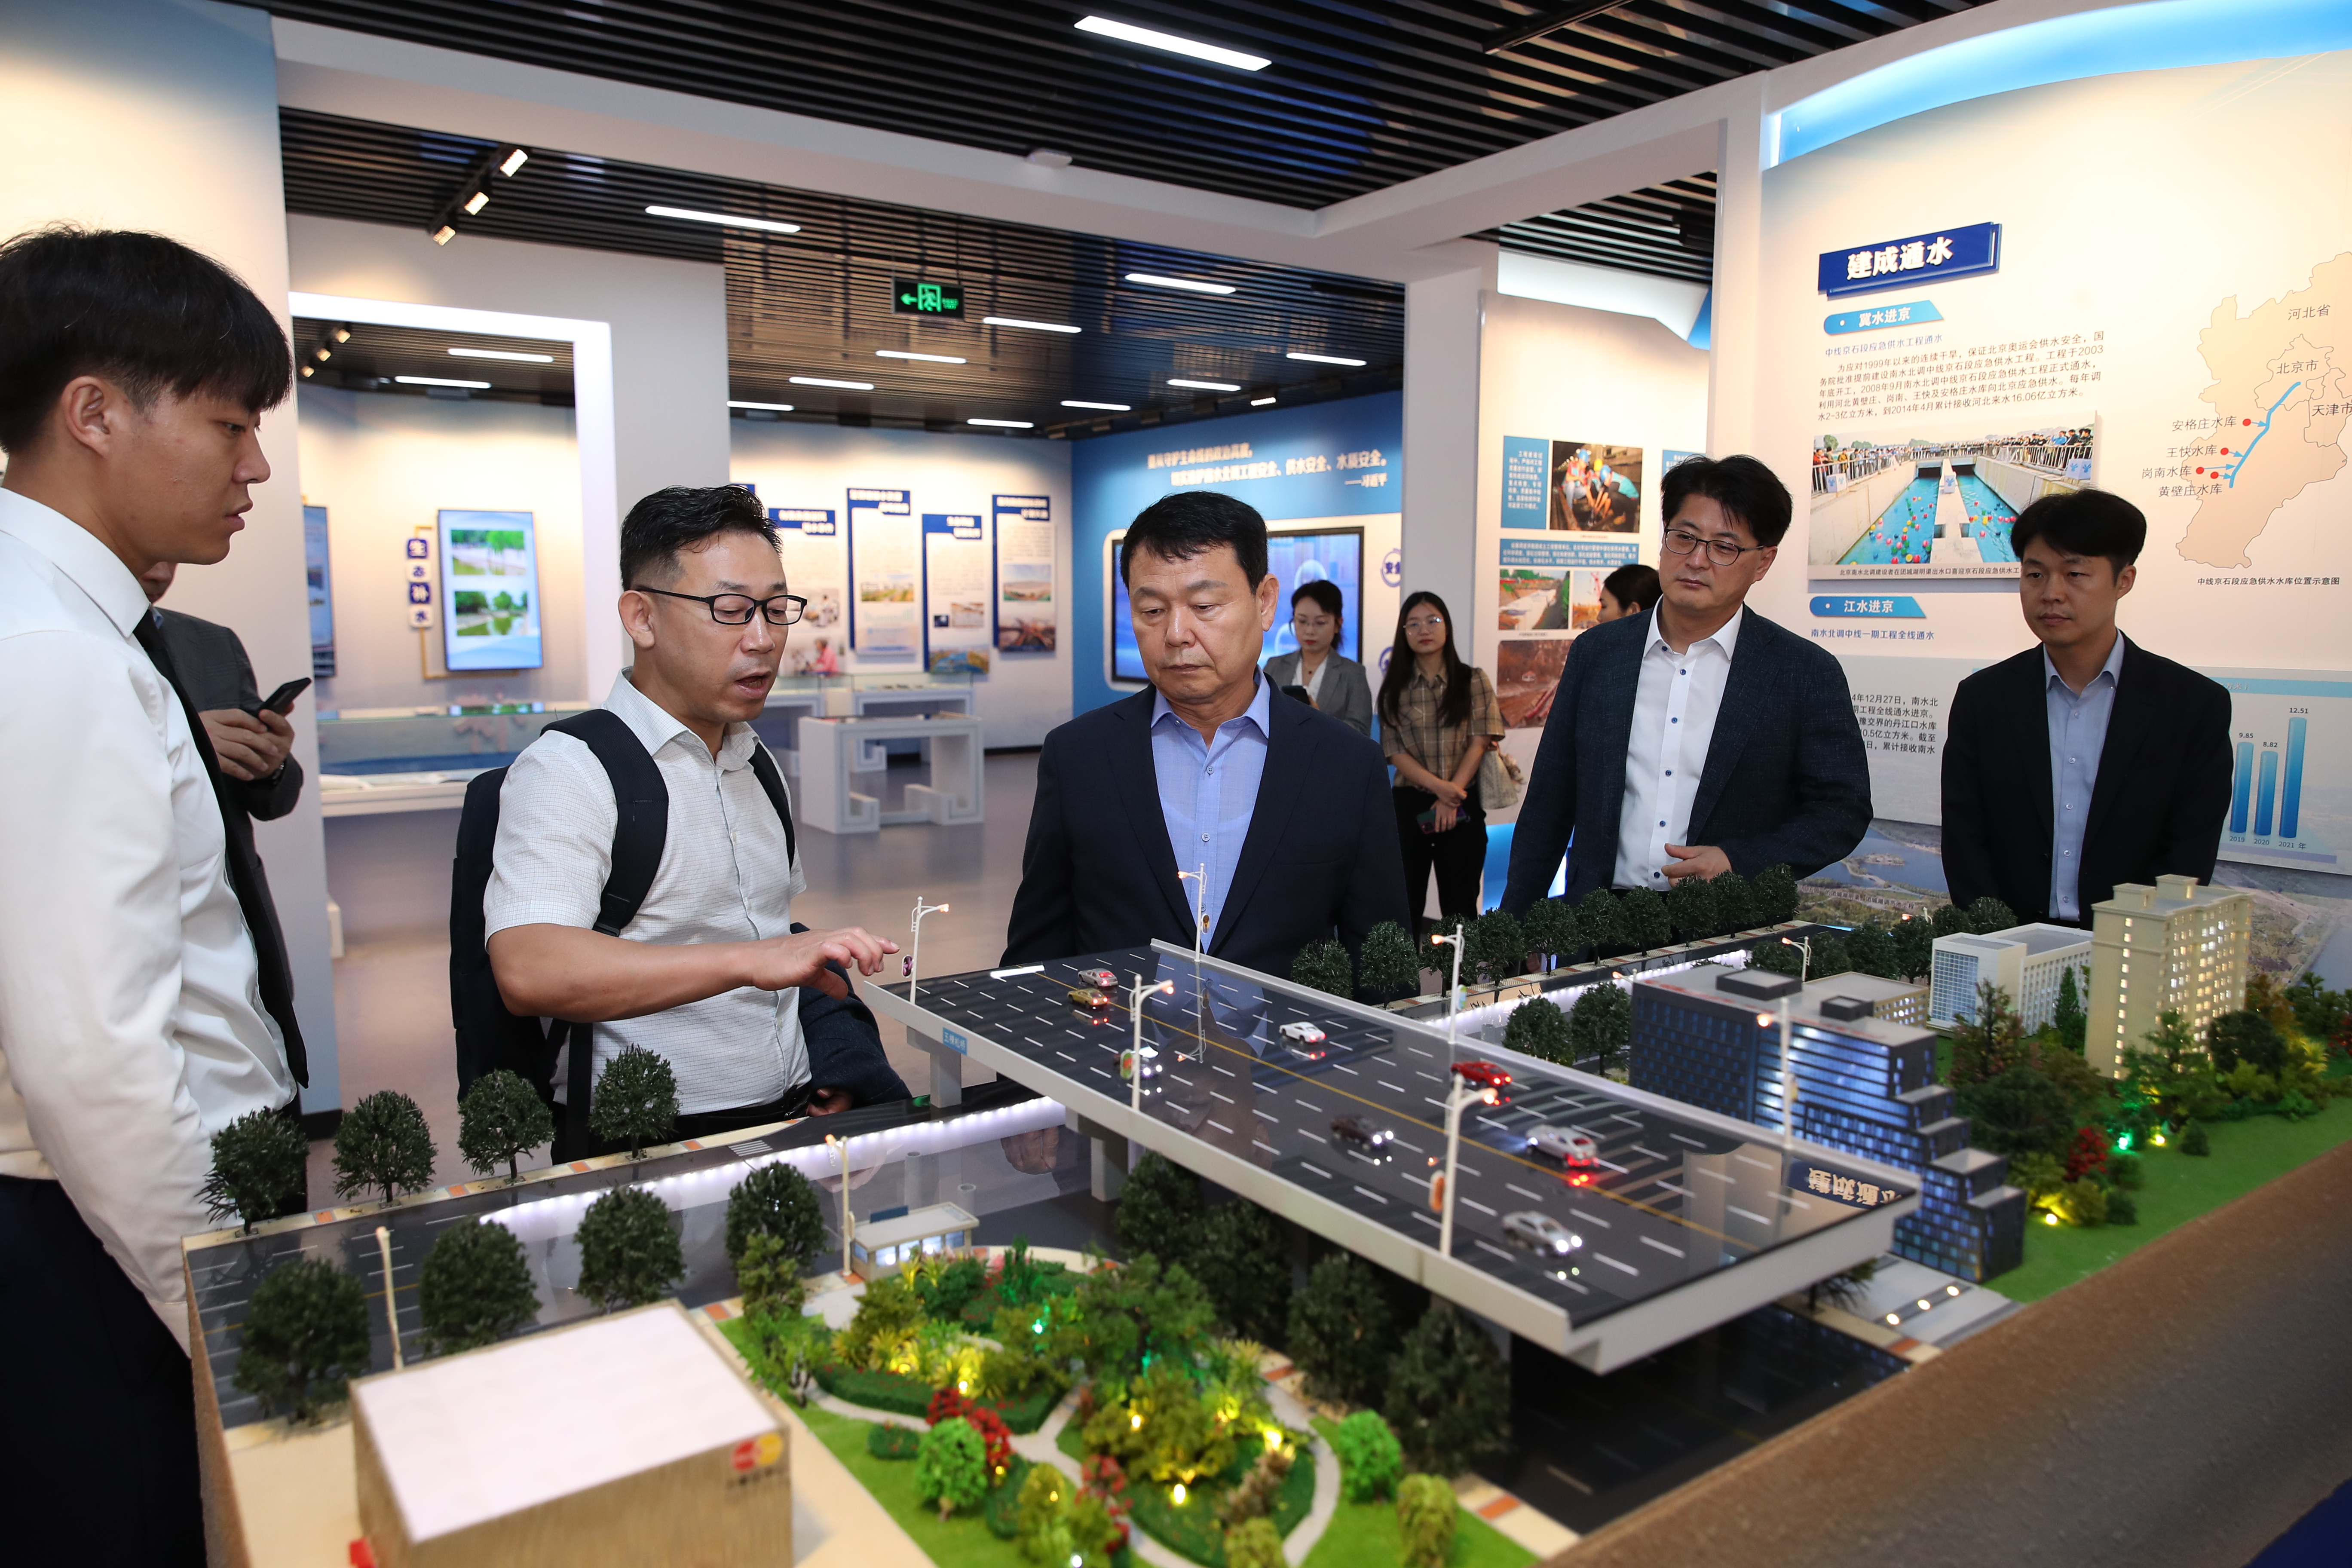 CEO Visits the Water Management Facilities in Beijing